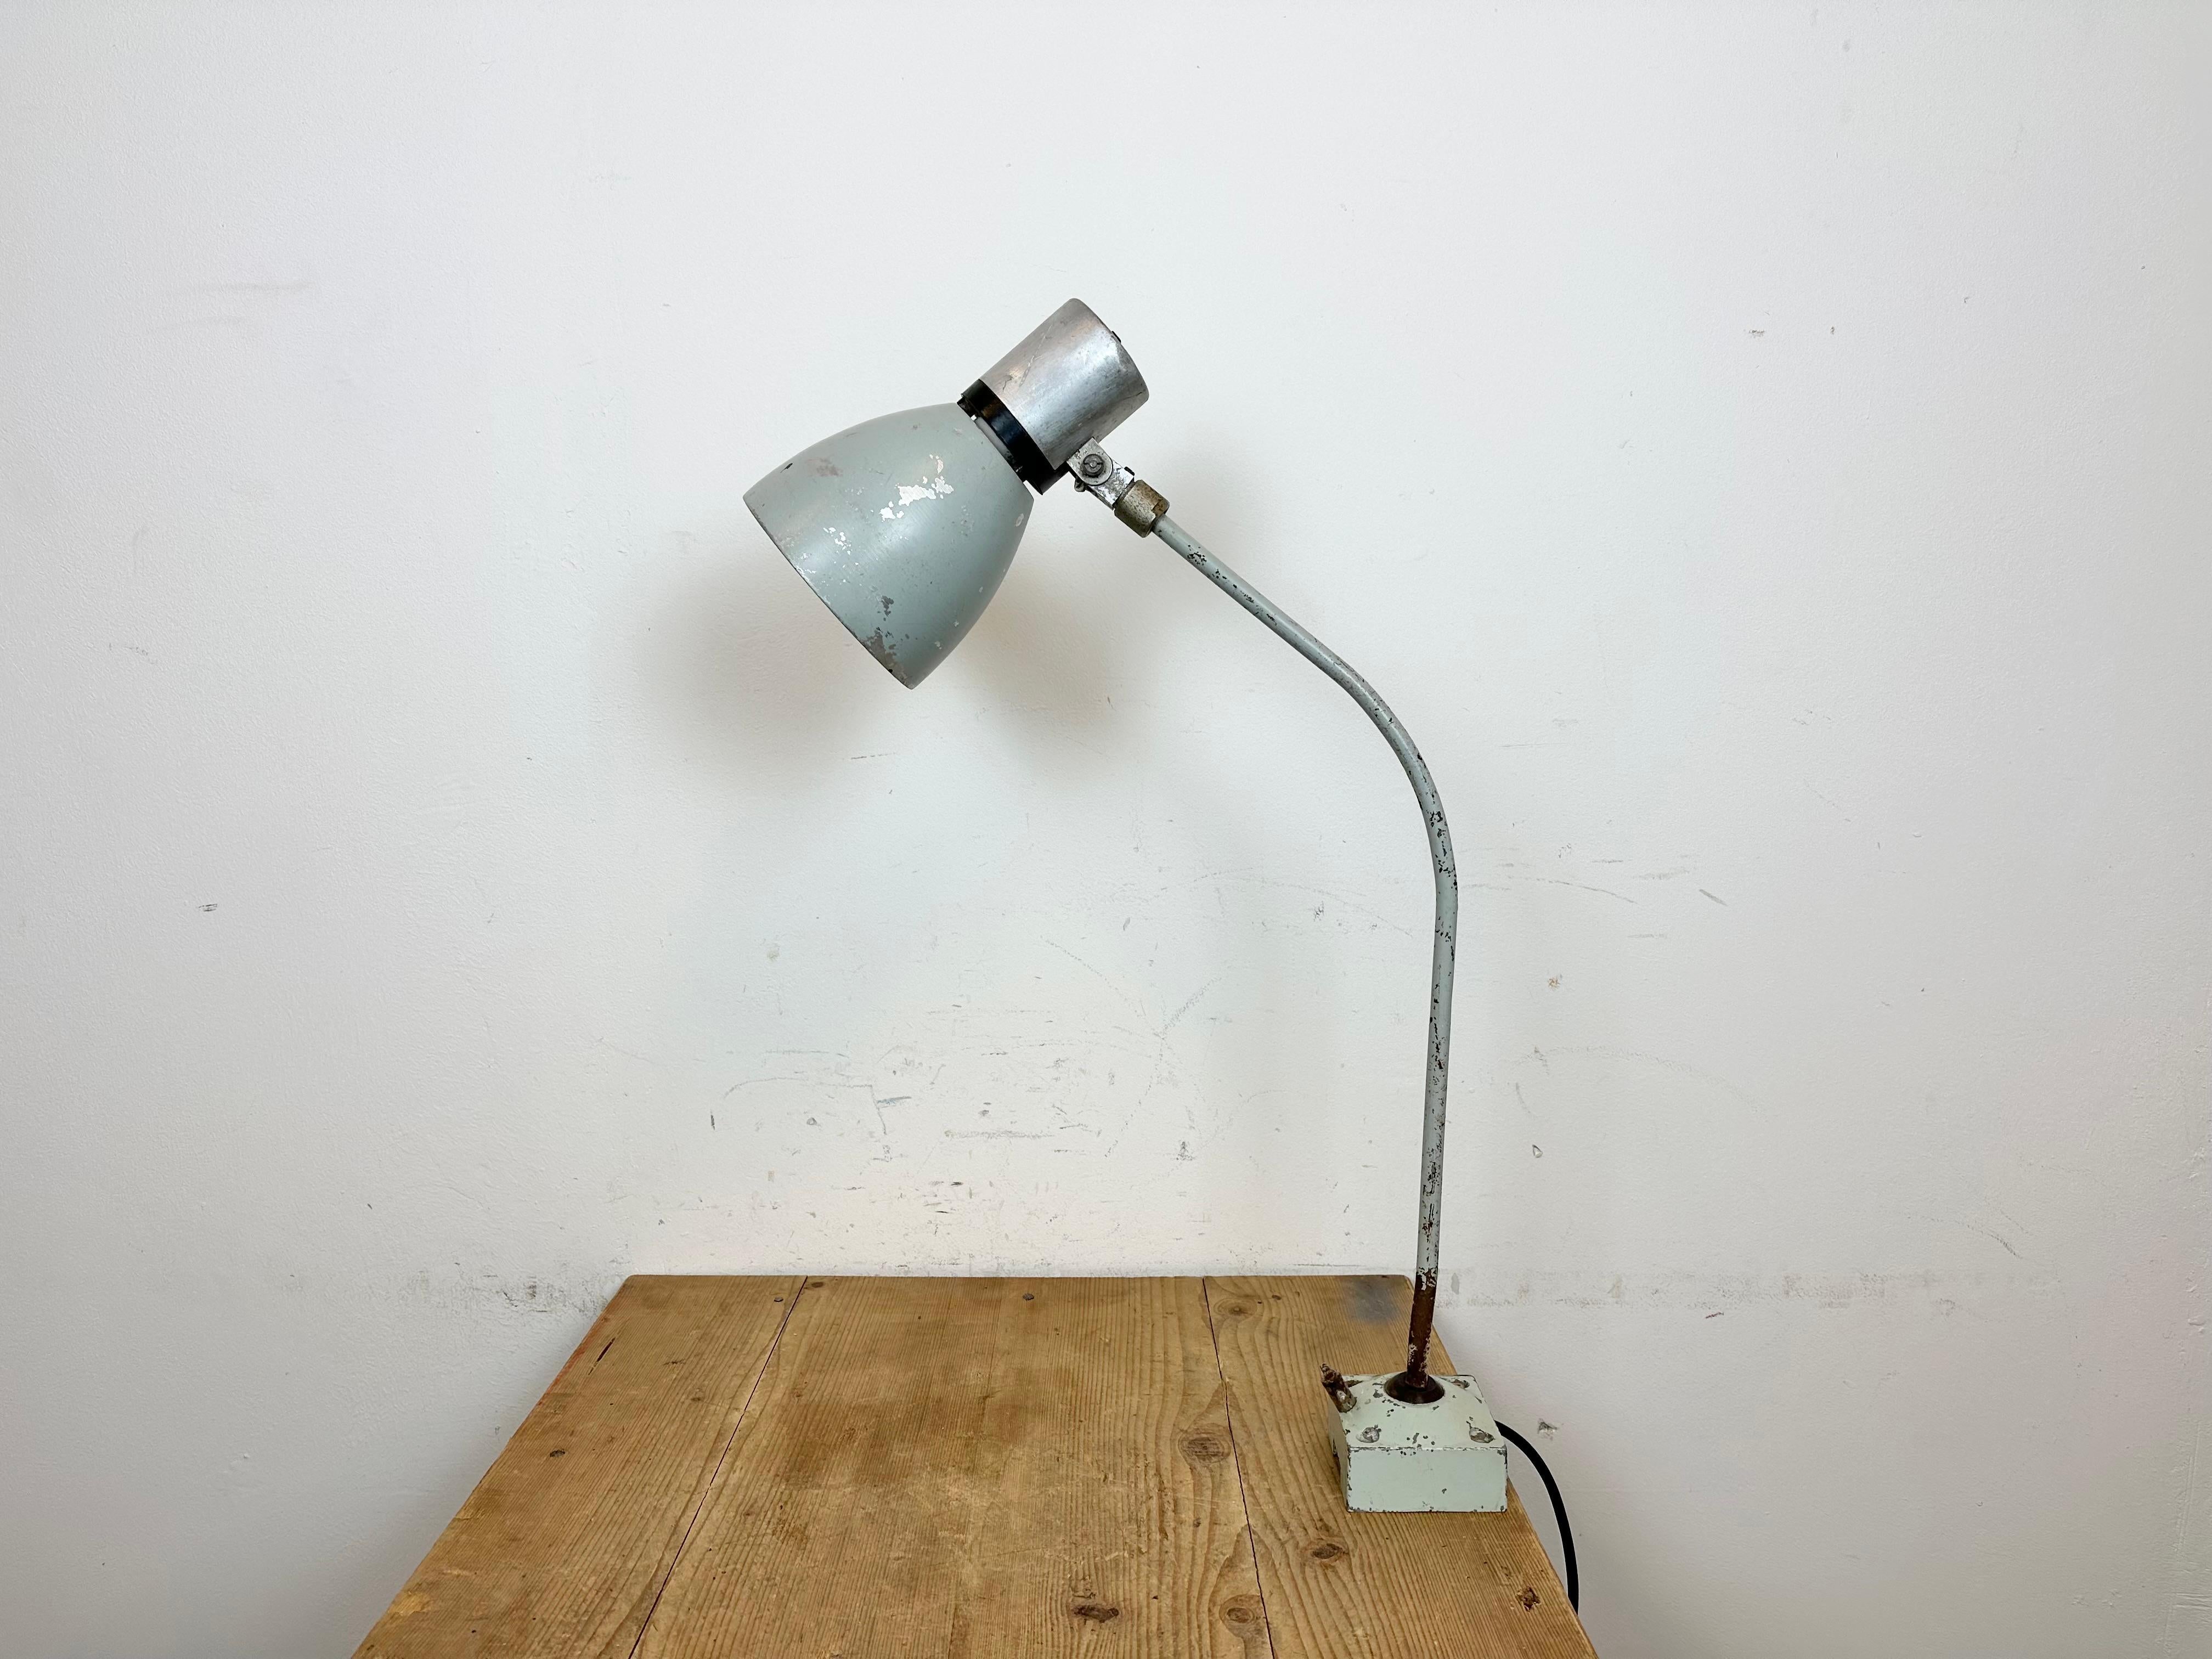 Industrial workshop table lamp made by Elektrosvit in former Czechoslovakia during the 1970s. It features an iron base and arm and aluminium shade with original switch on the top. The socket requires standard E 27 / E26 lightbulbs. New wiring. The